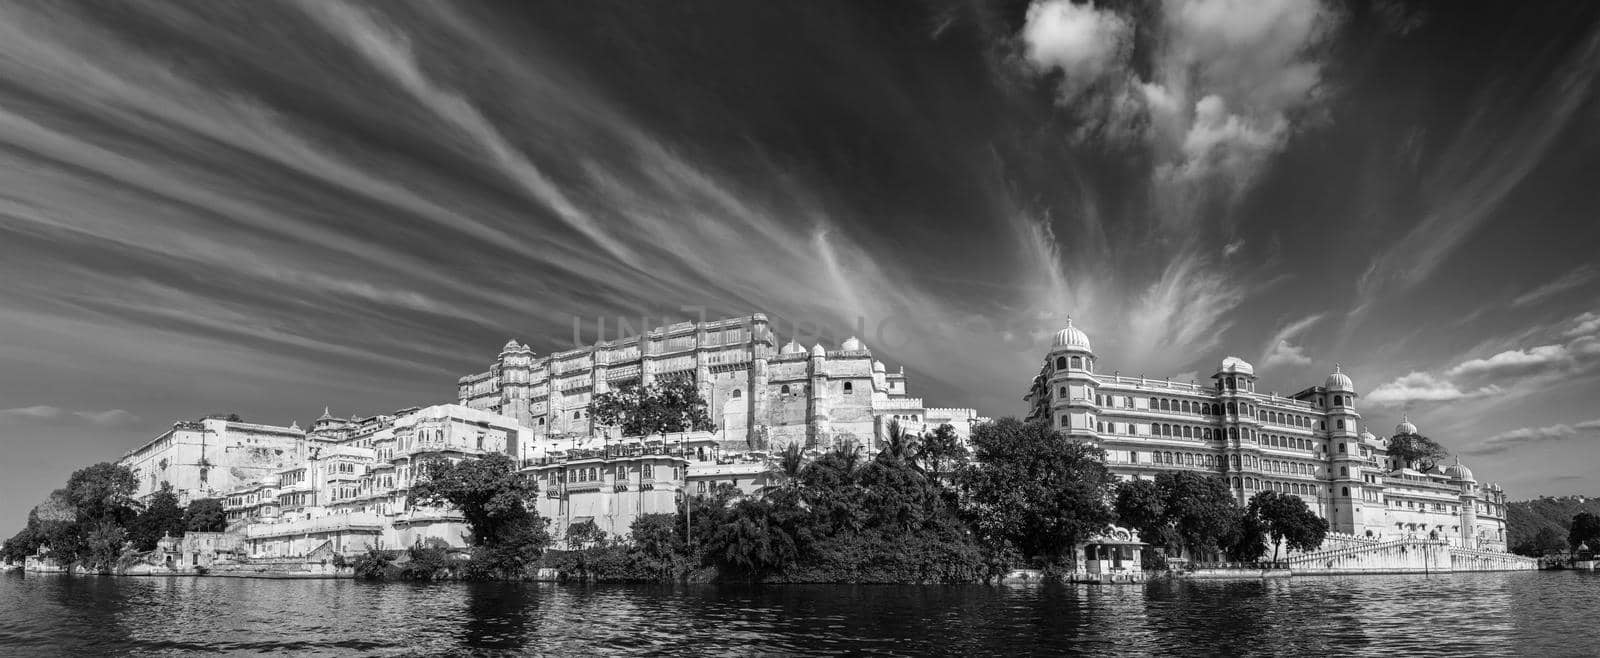 Panorama of City Palace. Udaipur, India by dimol